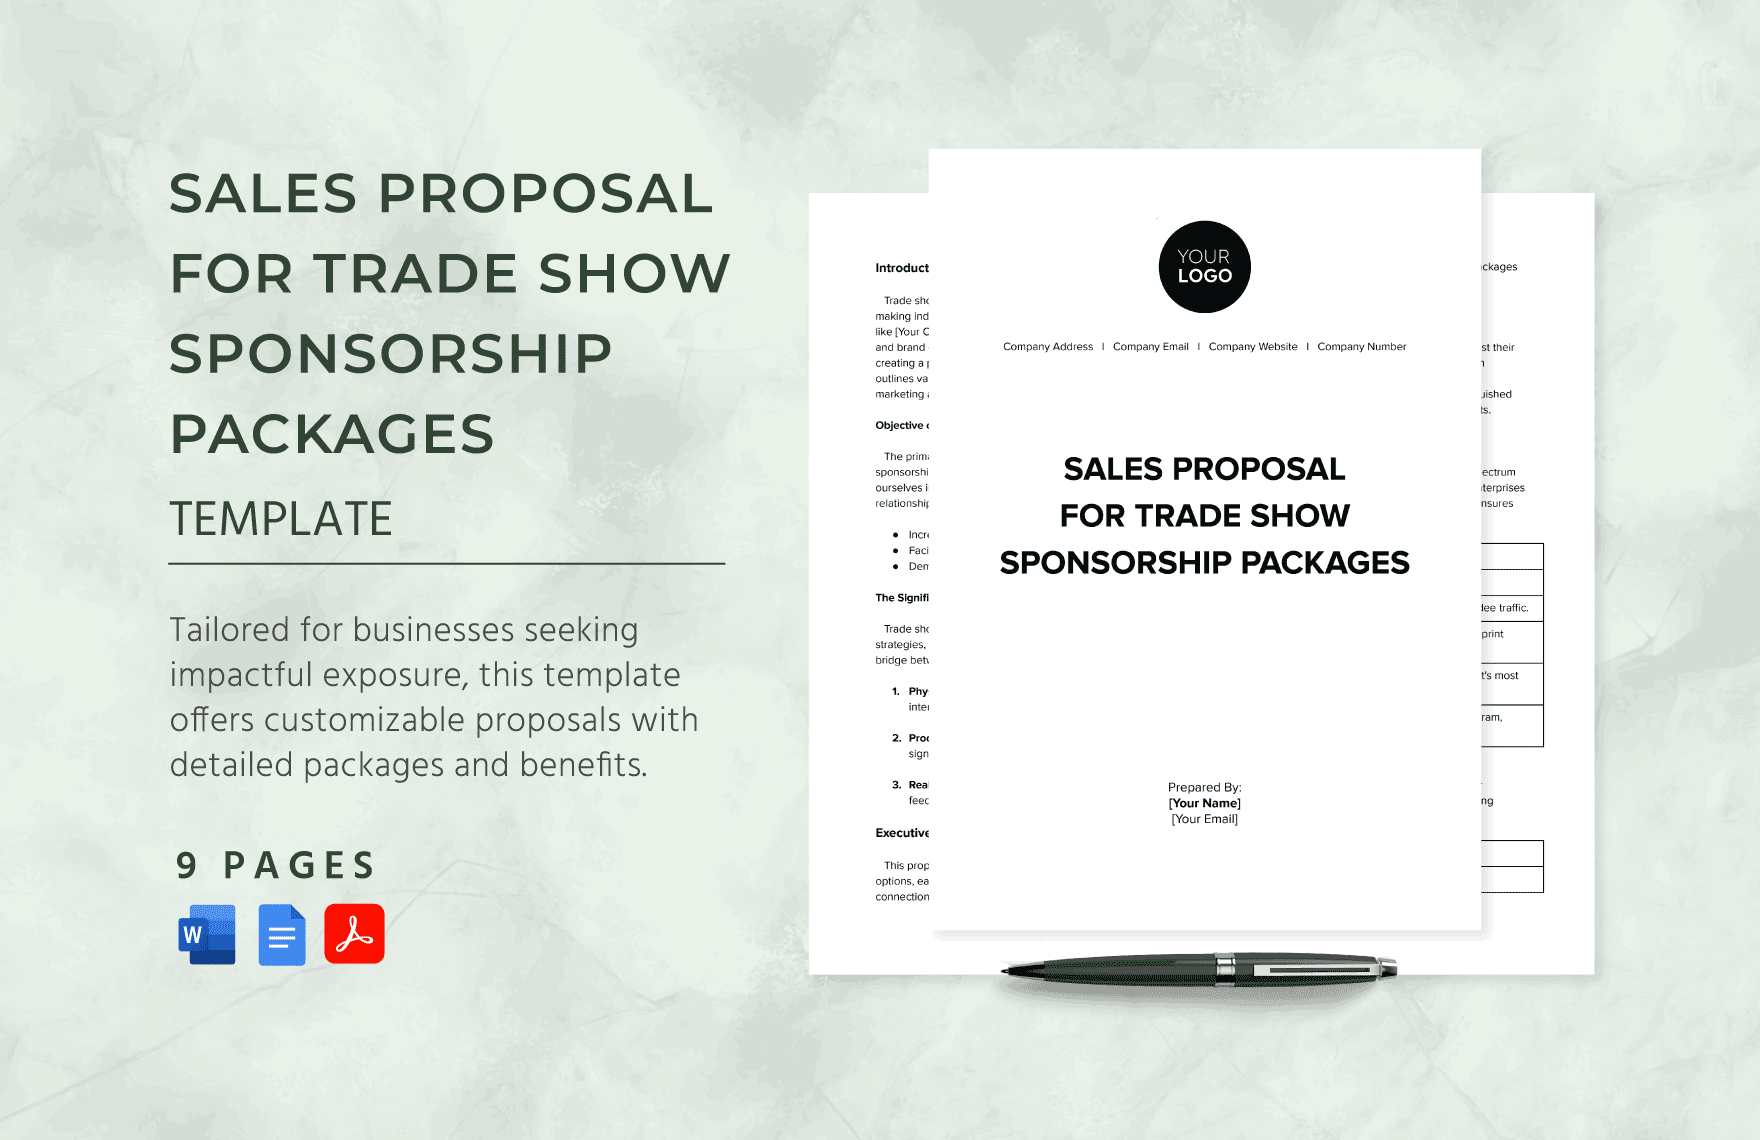 Sales Proposal for Trade Show Sponsorship Packages Template